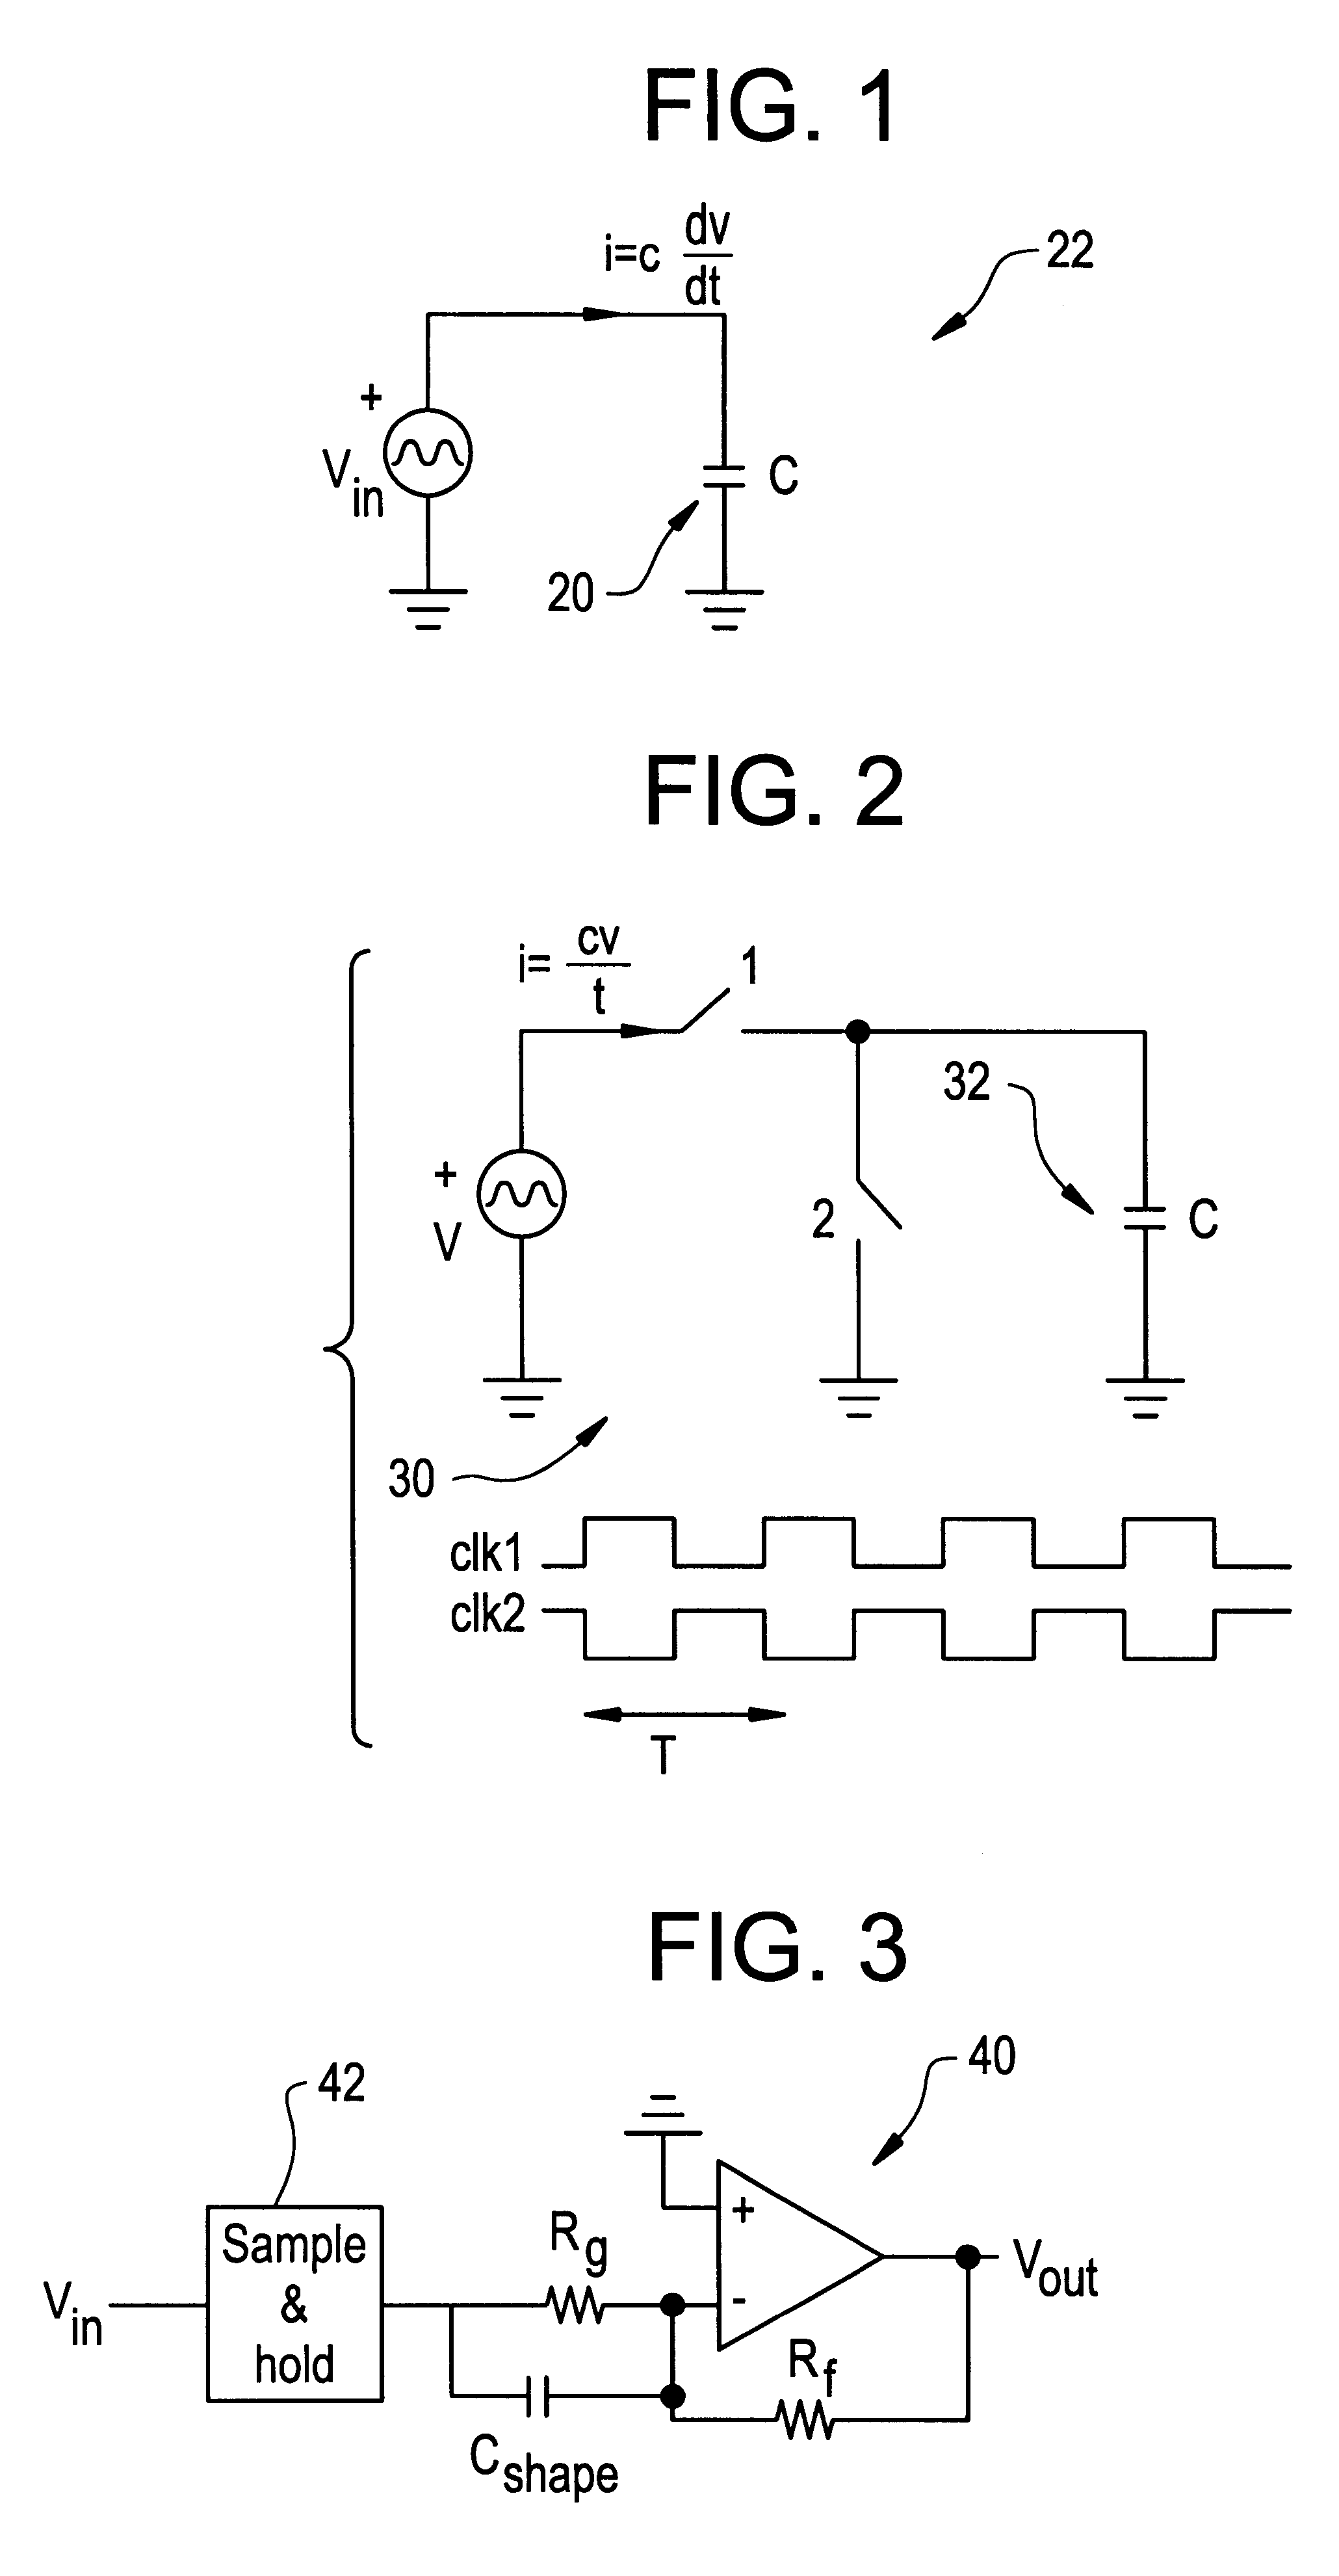 Passive sample and hold in an active switched capacitor circuit